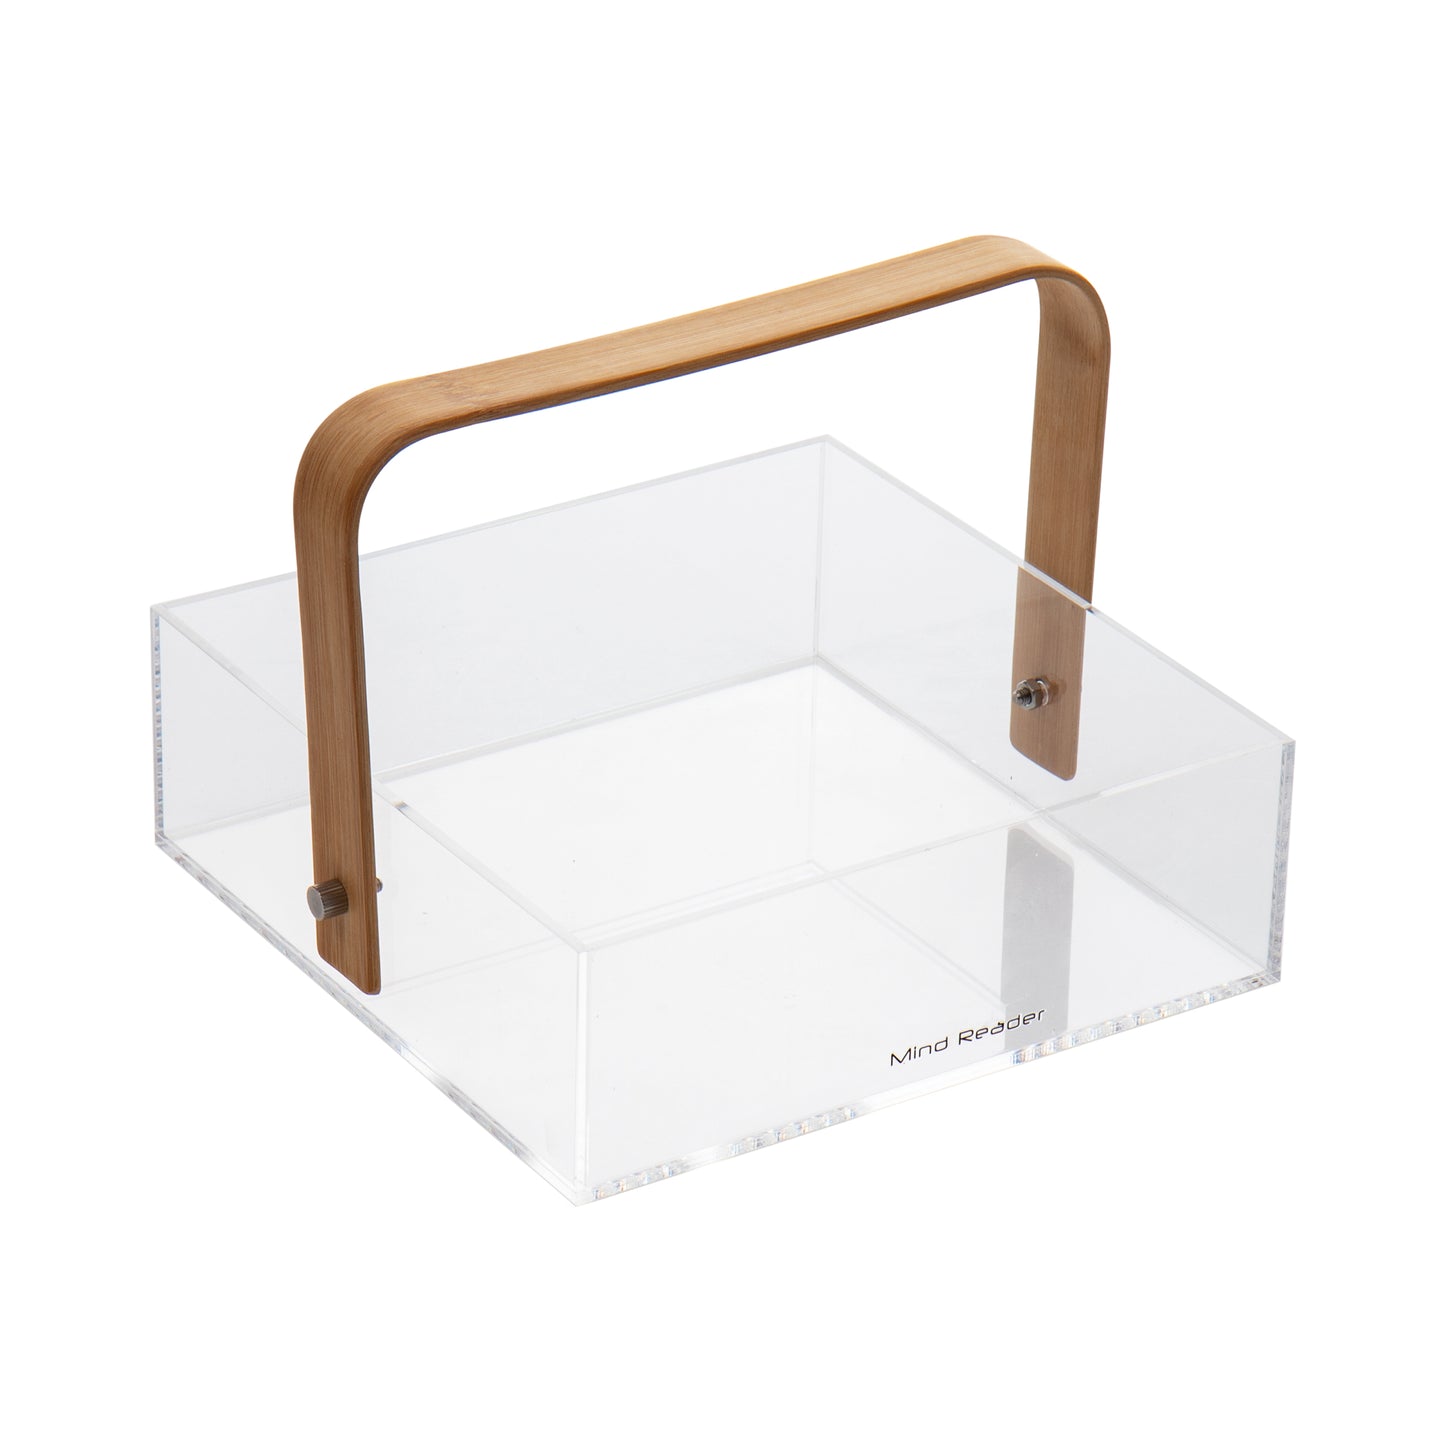 Mind Reader Modern Collection, Napkin Caddy, Serveware, Breakroom, Countertop Organizer, Rayon from Bamboo and Acrylic, Brown